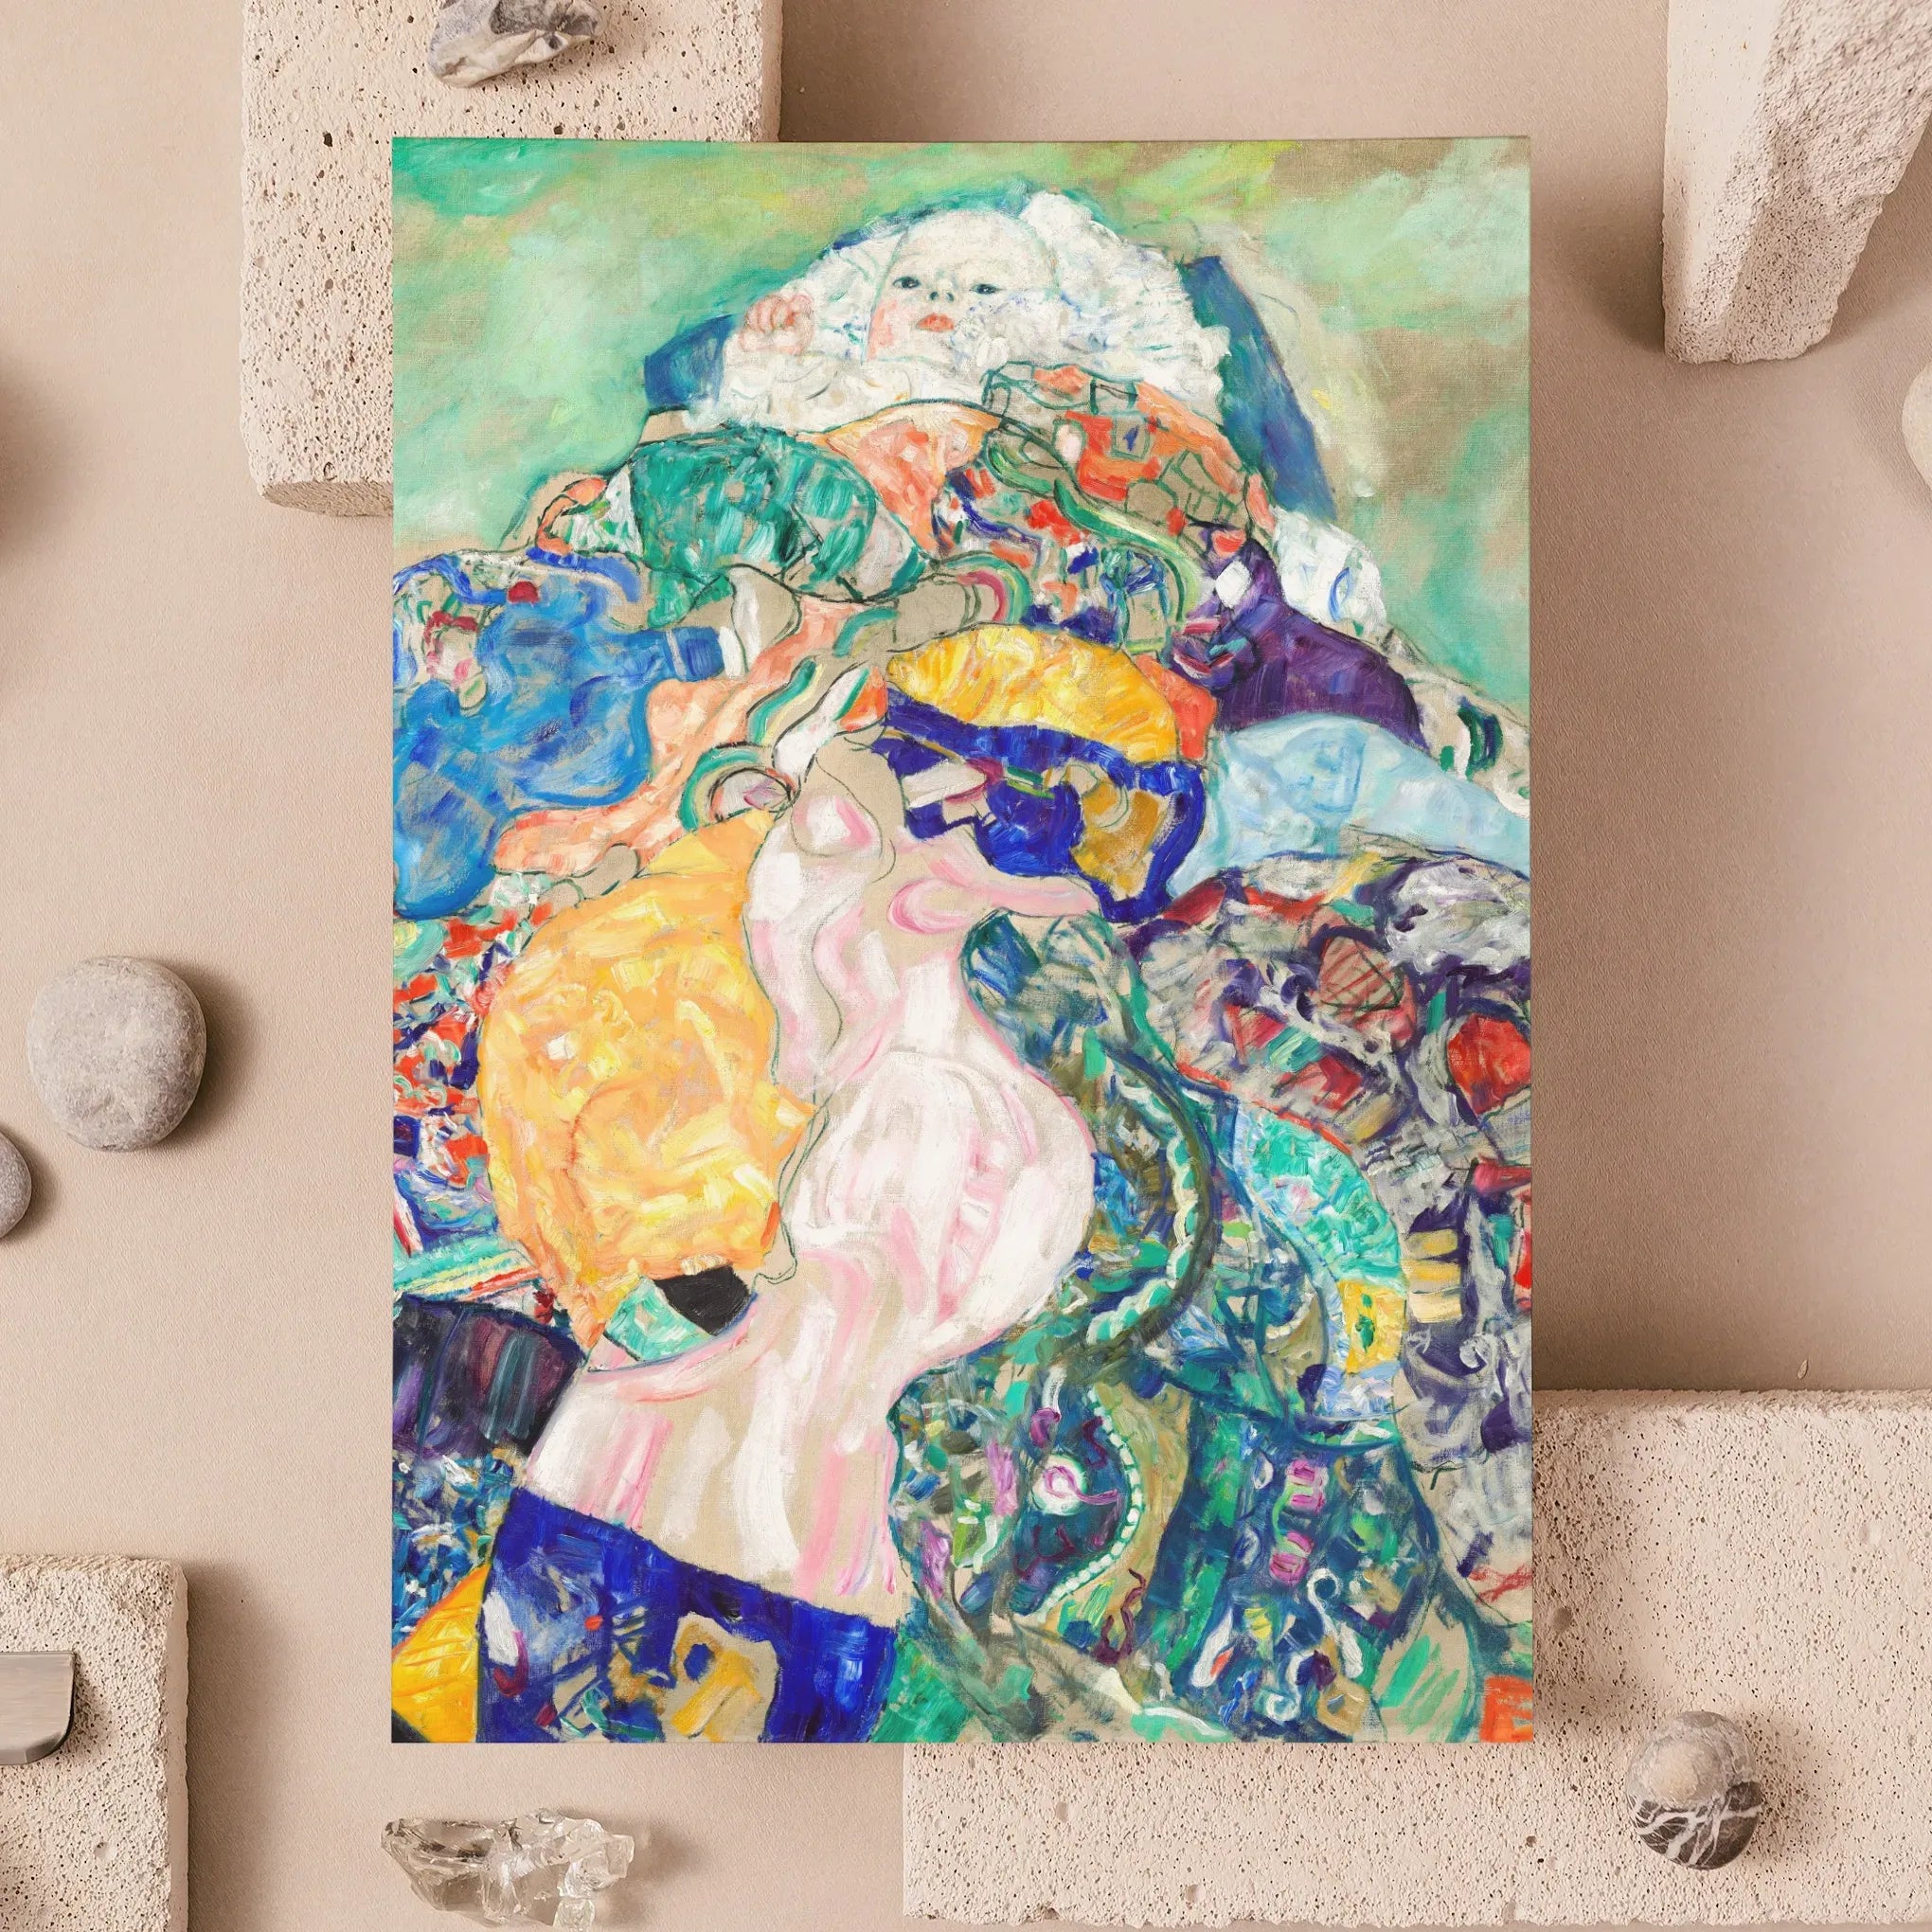 Baby - Gustav Klimt Vienna Secession Art Greeting Card - Greeting & Note Cards - Aesthetic Art